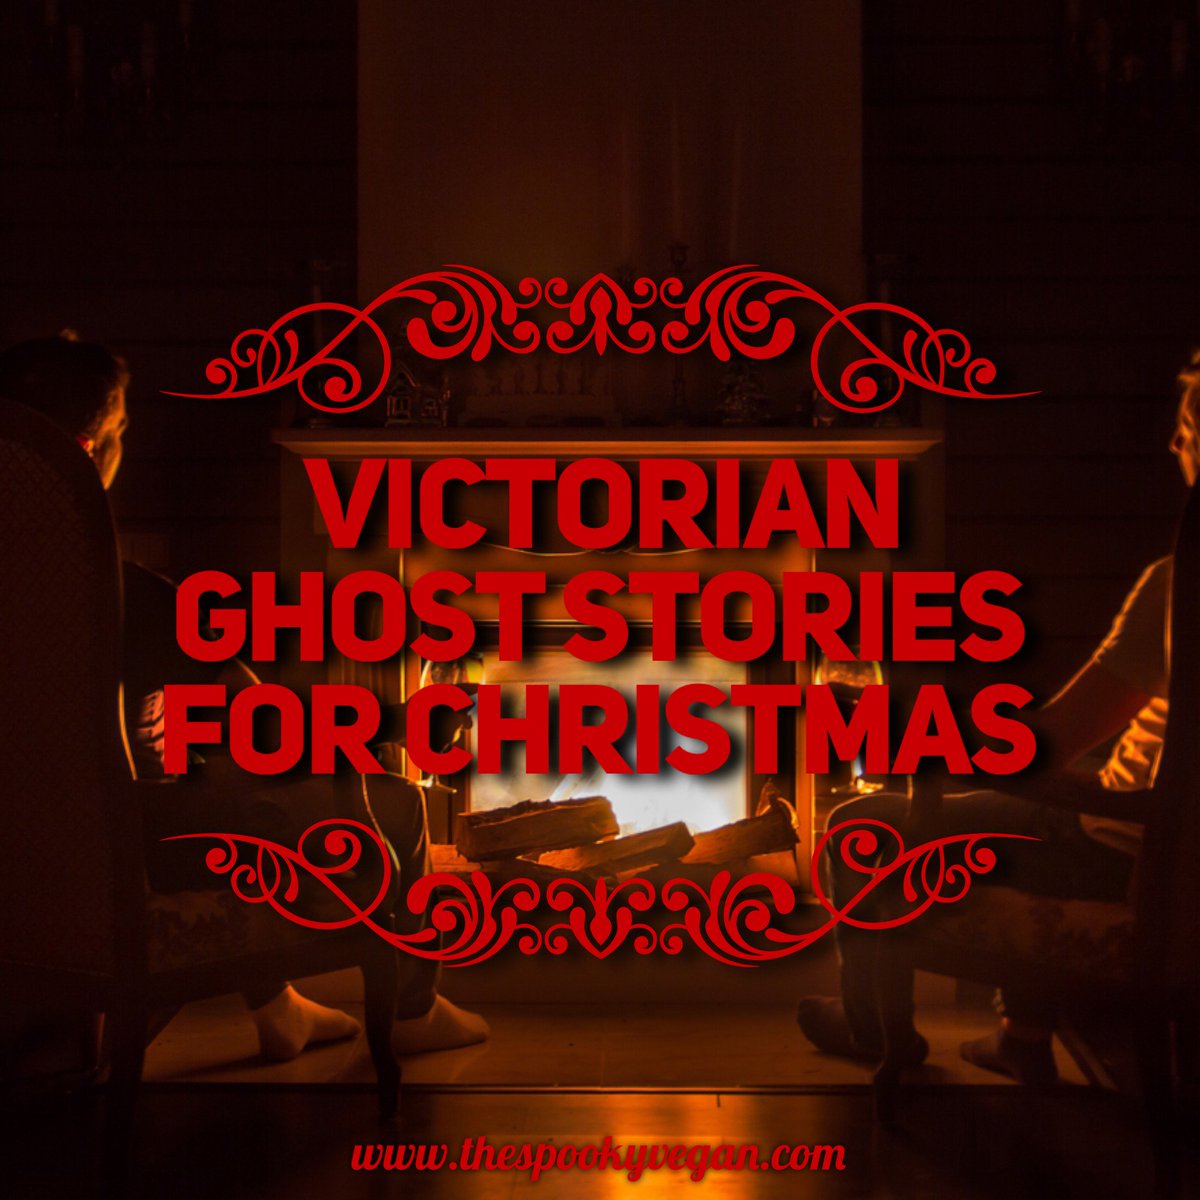 Chilly weekend mornings are the perfect time to curl up with a Christmas ghost story! Read about the Victorian tradition of telling ghost stories during the holidays & some chilling Christmas ghost stories you can read now: thespookyvegan.com/2018/12/victor… #christmasghoststories #creepmas